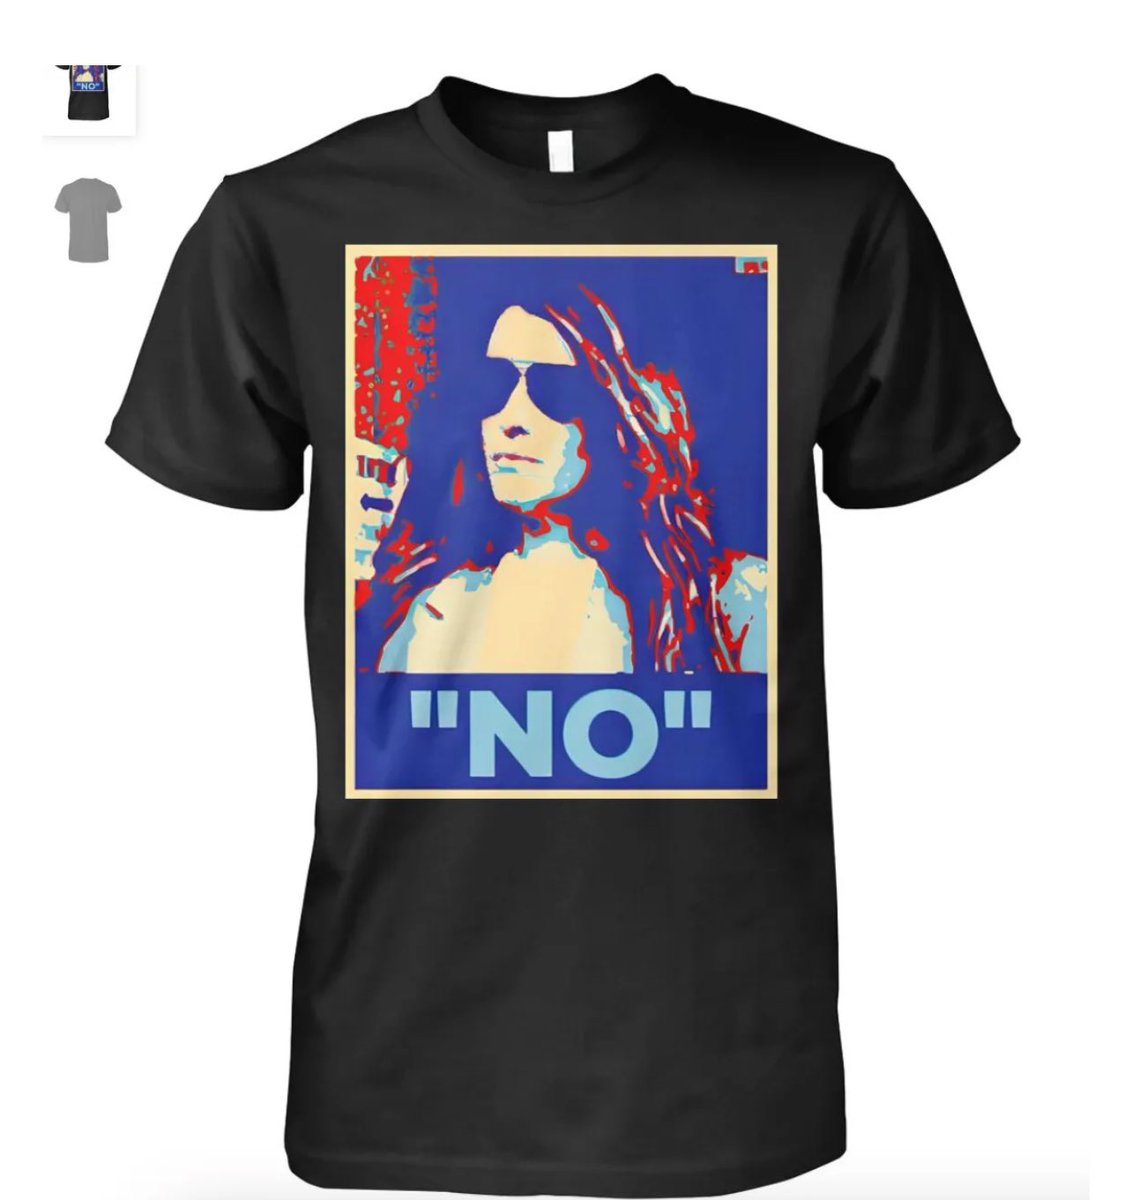 “Sall has said repeatedly that she is being taken to court for saying no to a man. I don’t know who made this t-shirt featuring an image of Sall and the word “NO,” but I’ll be sure to buy one.” Thank you @KDansky 💗 open.substack.com/pub/karadansky…